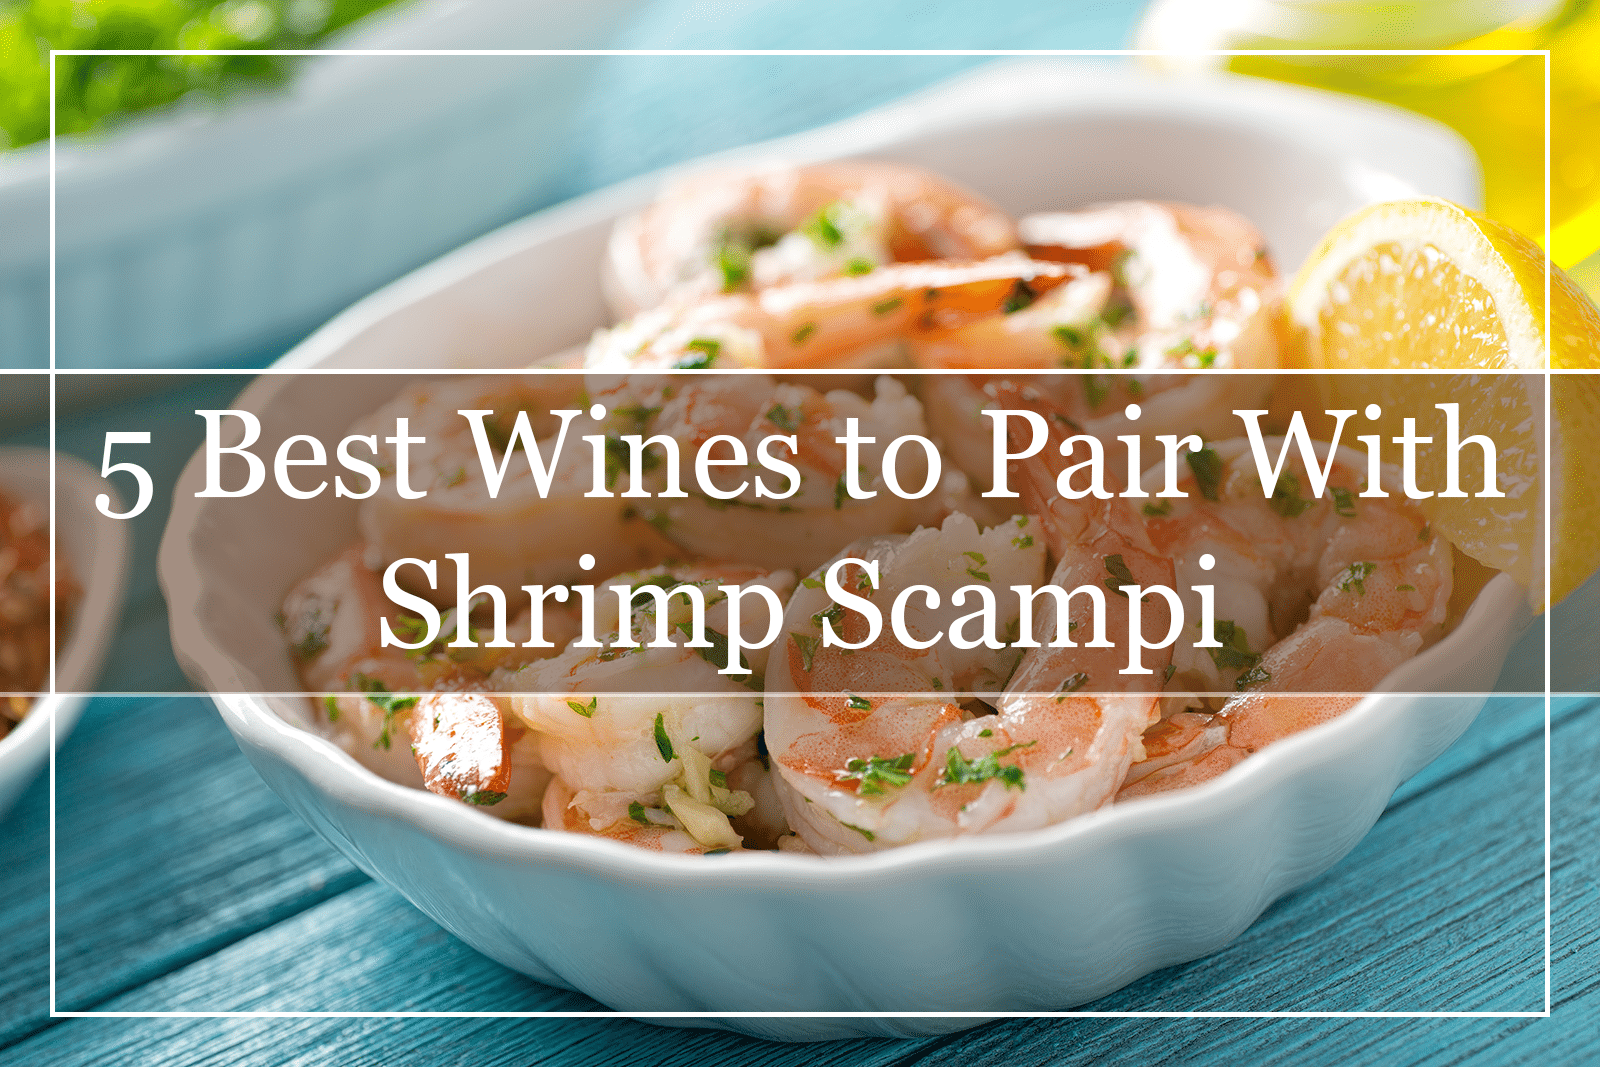 5 Best White Wines to Pair With Shrimp Scampi (2022)